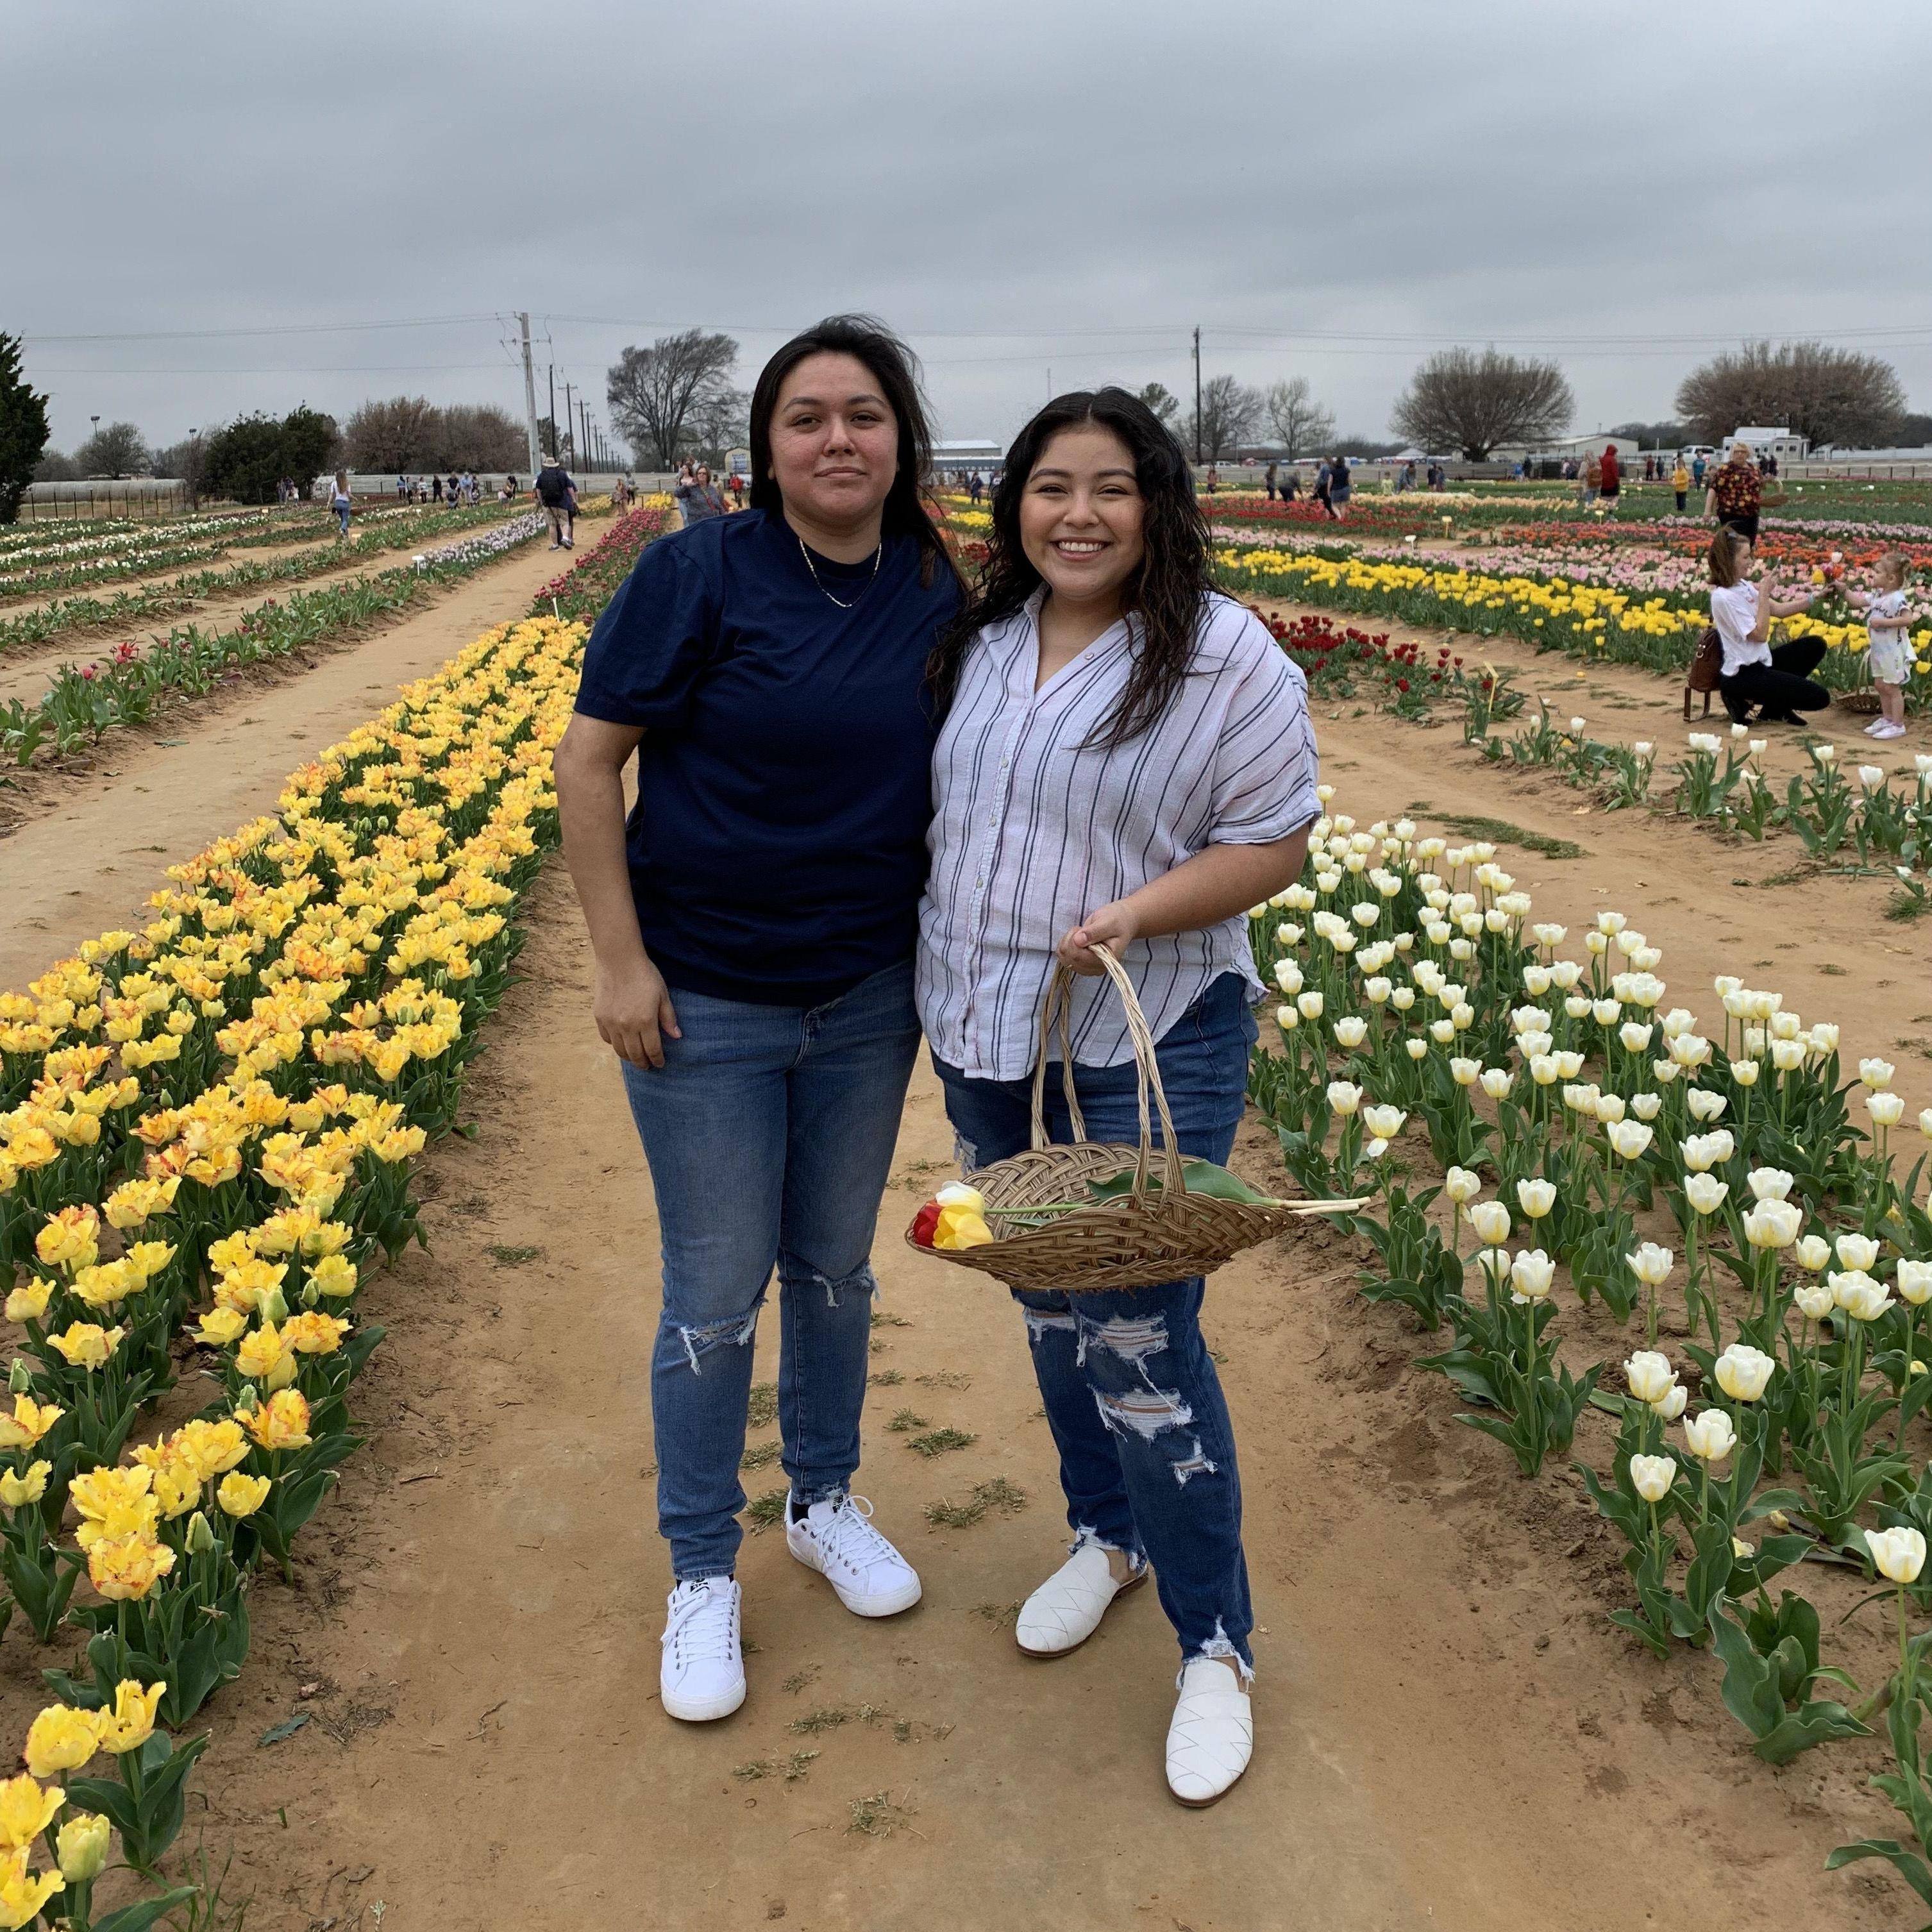 Date at Texas Tulips